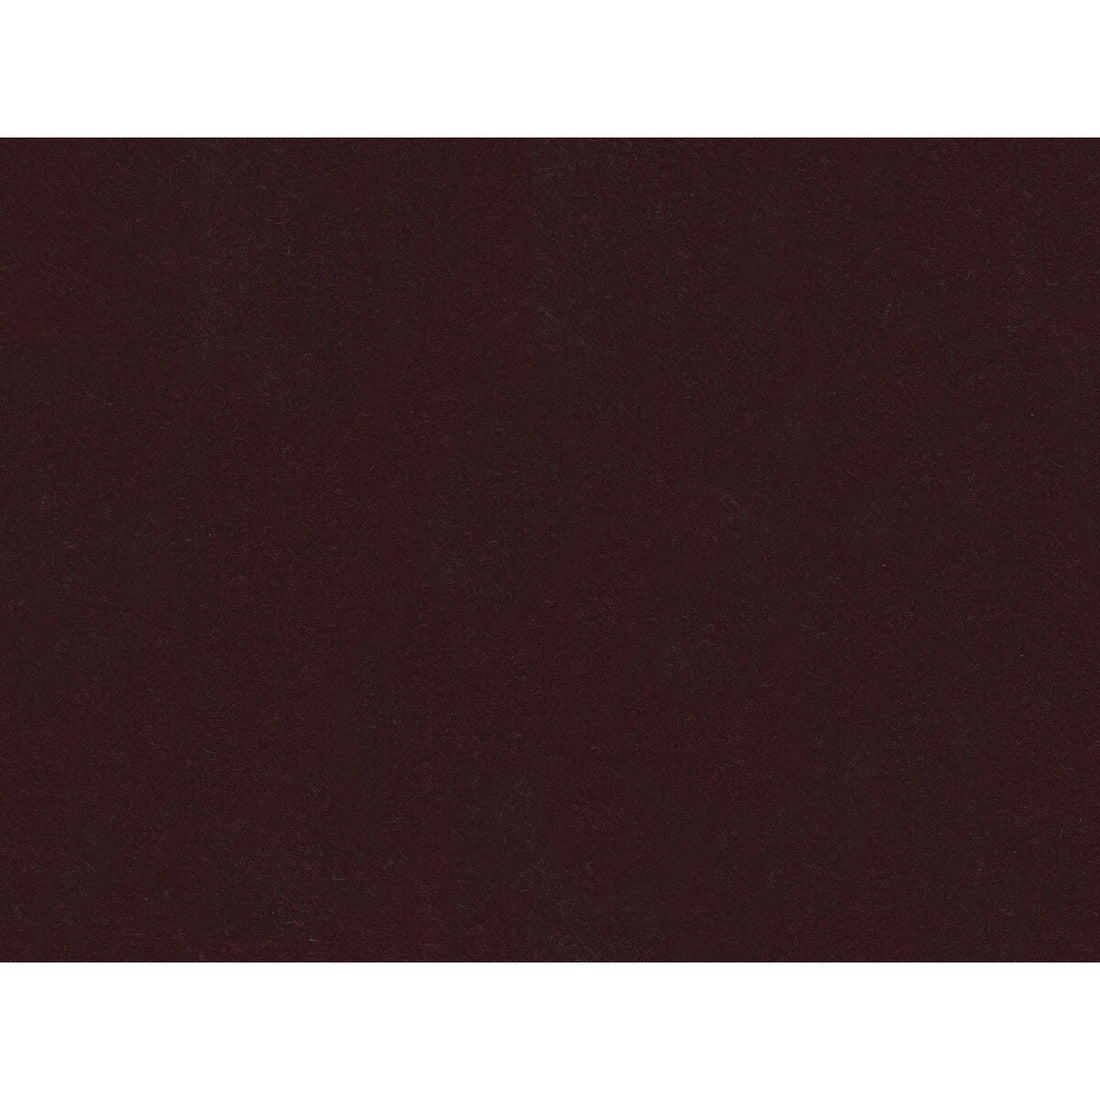 Statuesque fabric in merlot color - pattern 34328.9.0 - by Kravet Couture